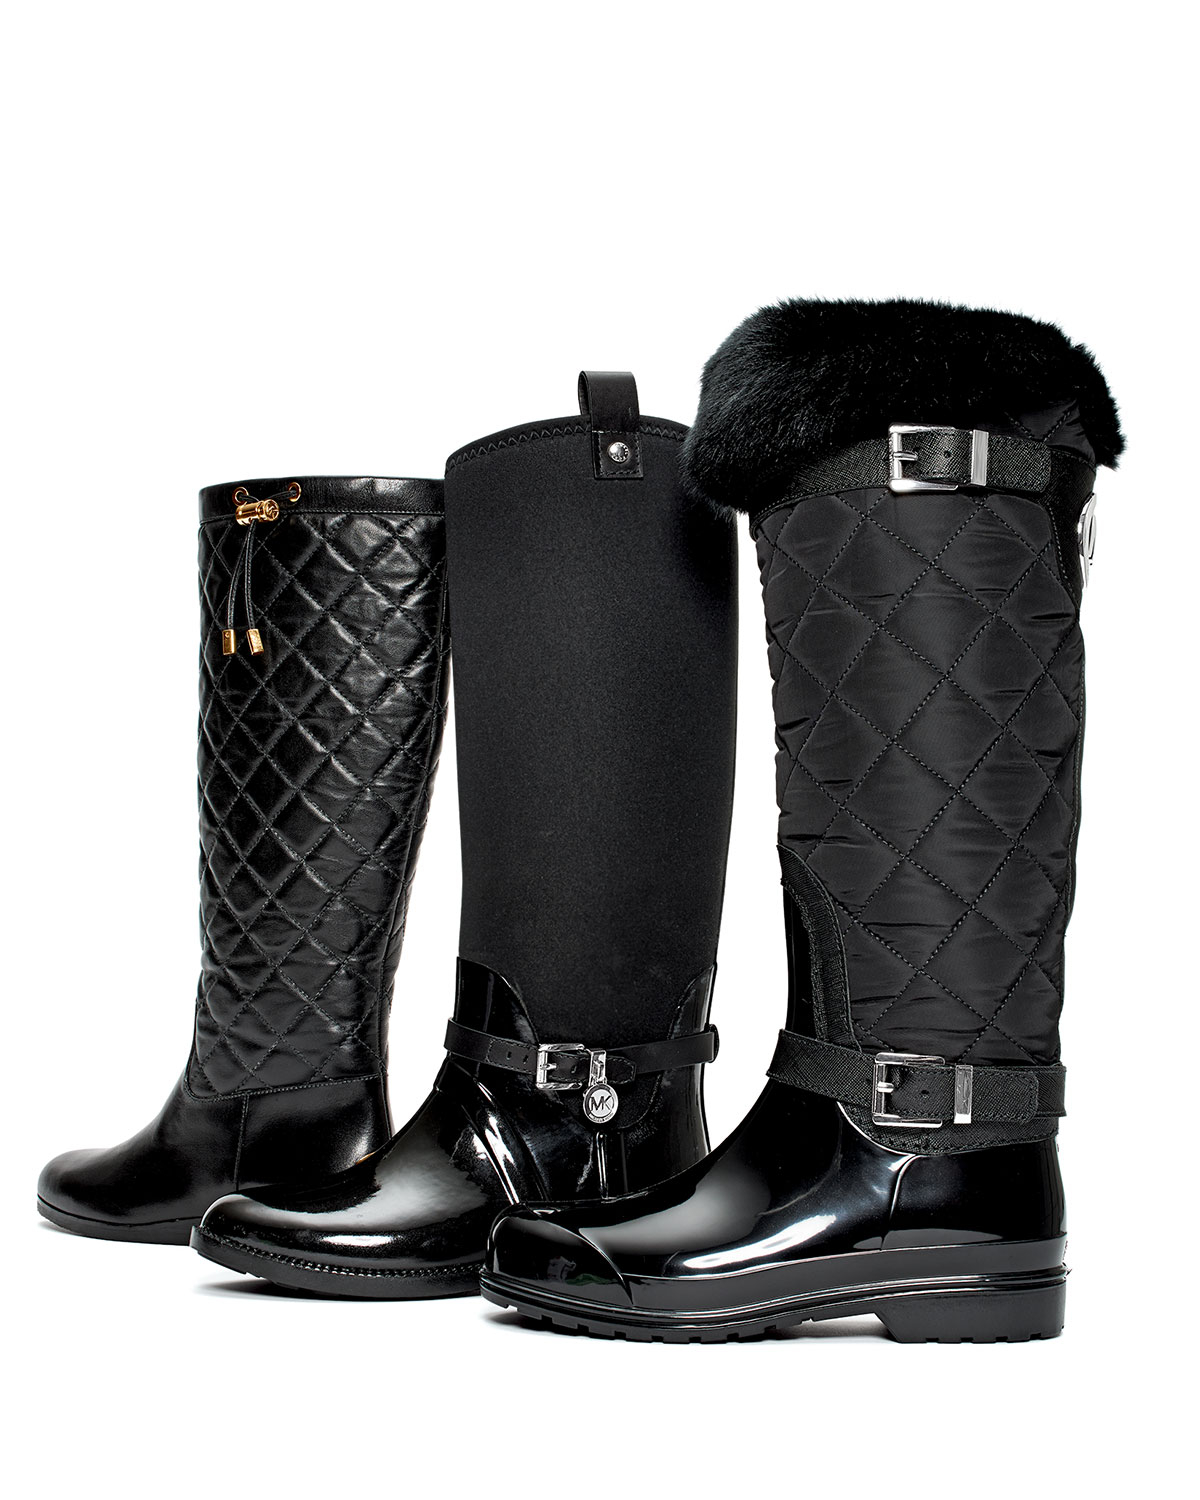 michael kors quilted rain boots